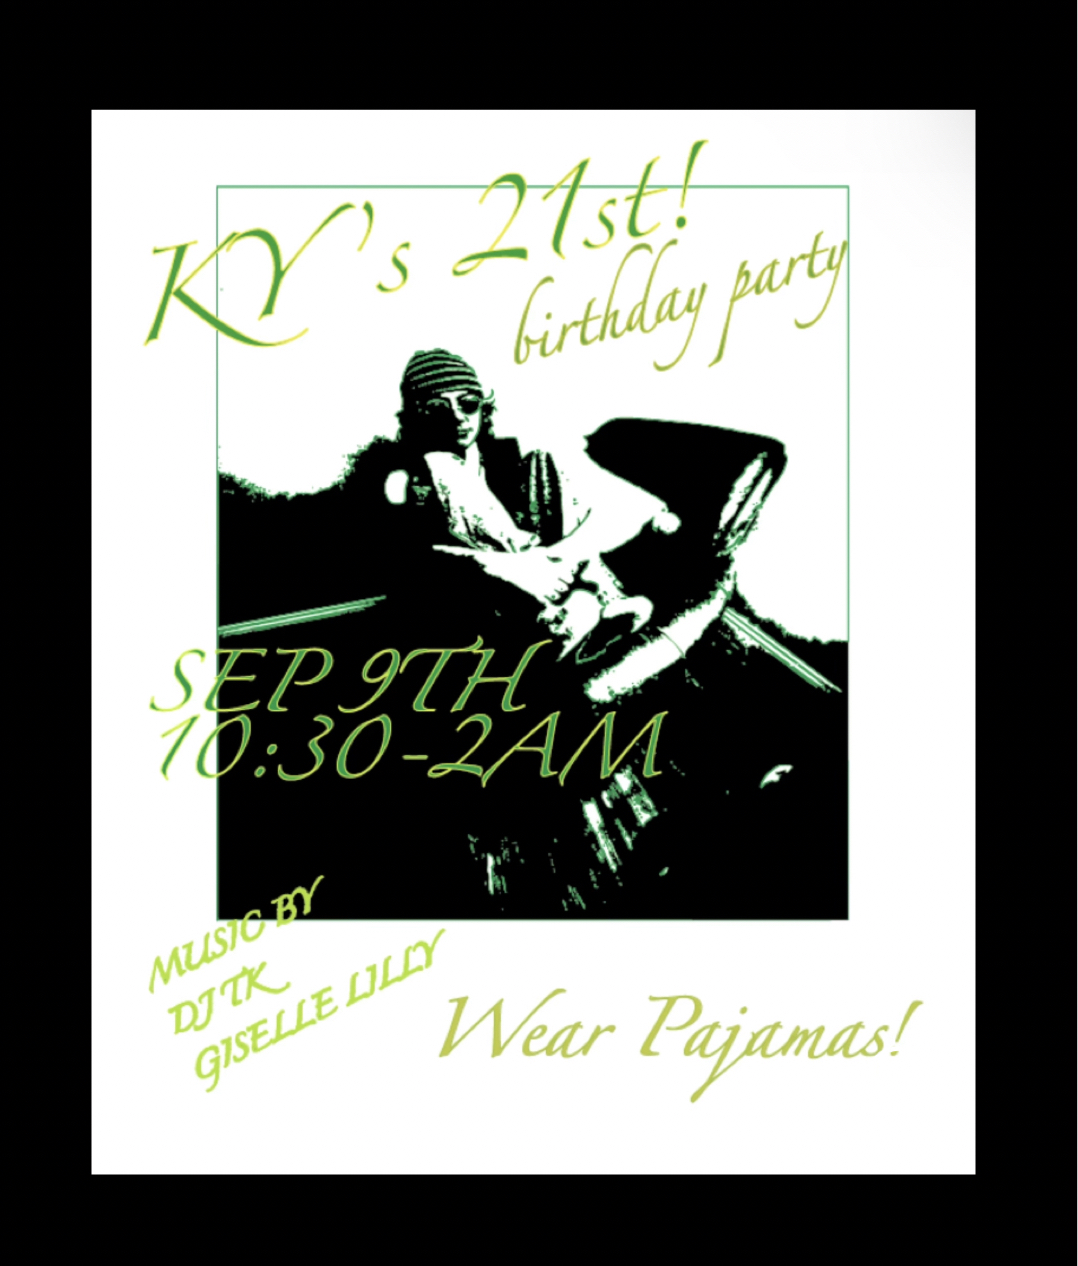 image party flyer